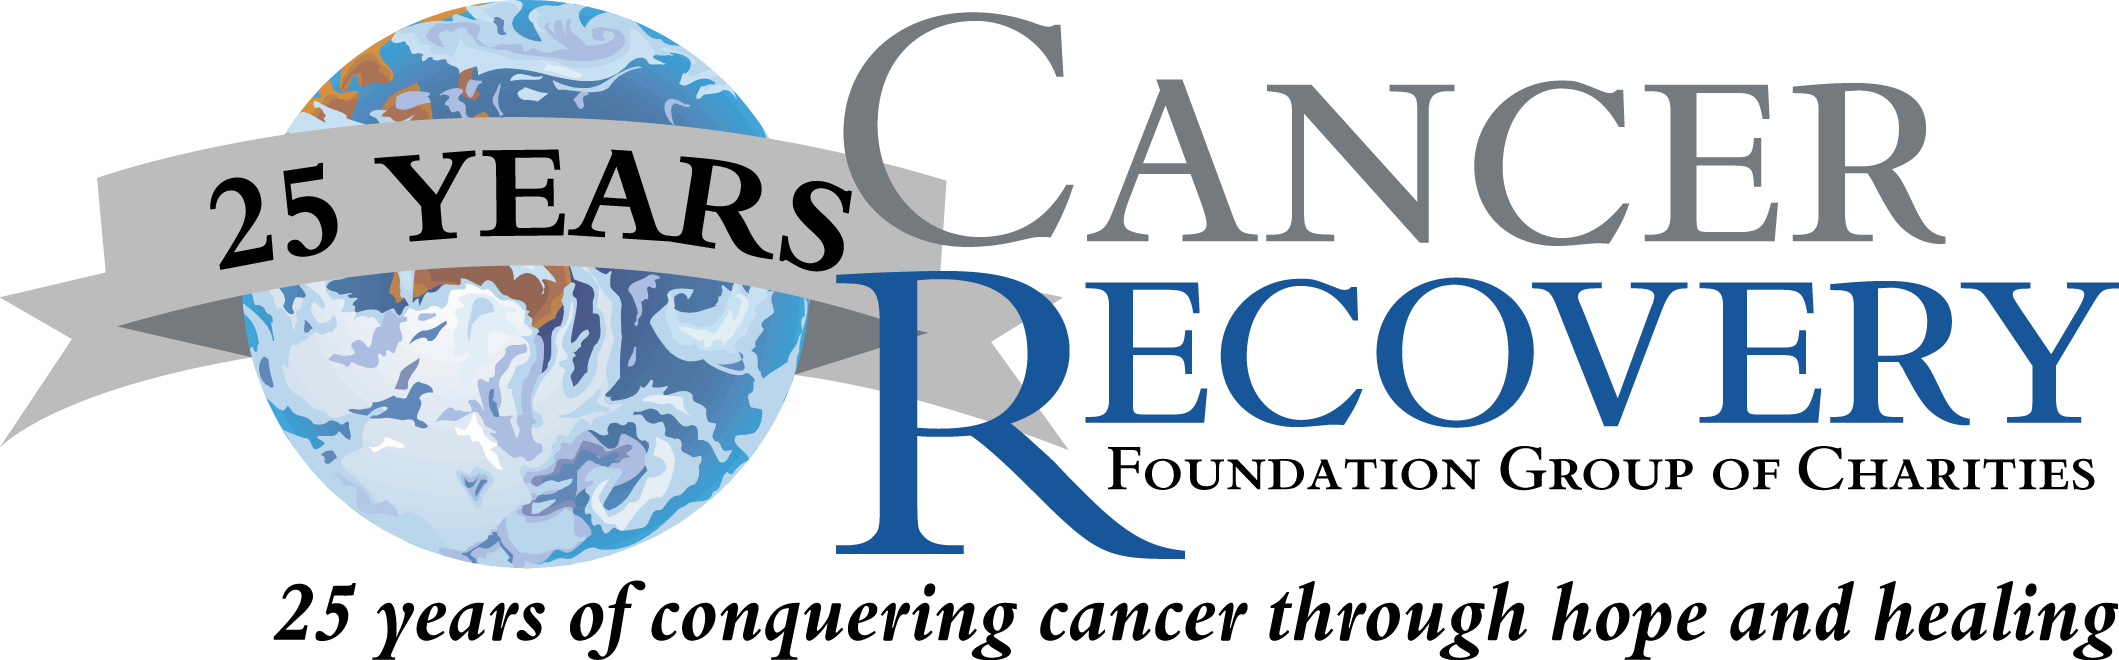 Cancer Recovery Foundation Group logo